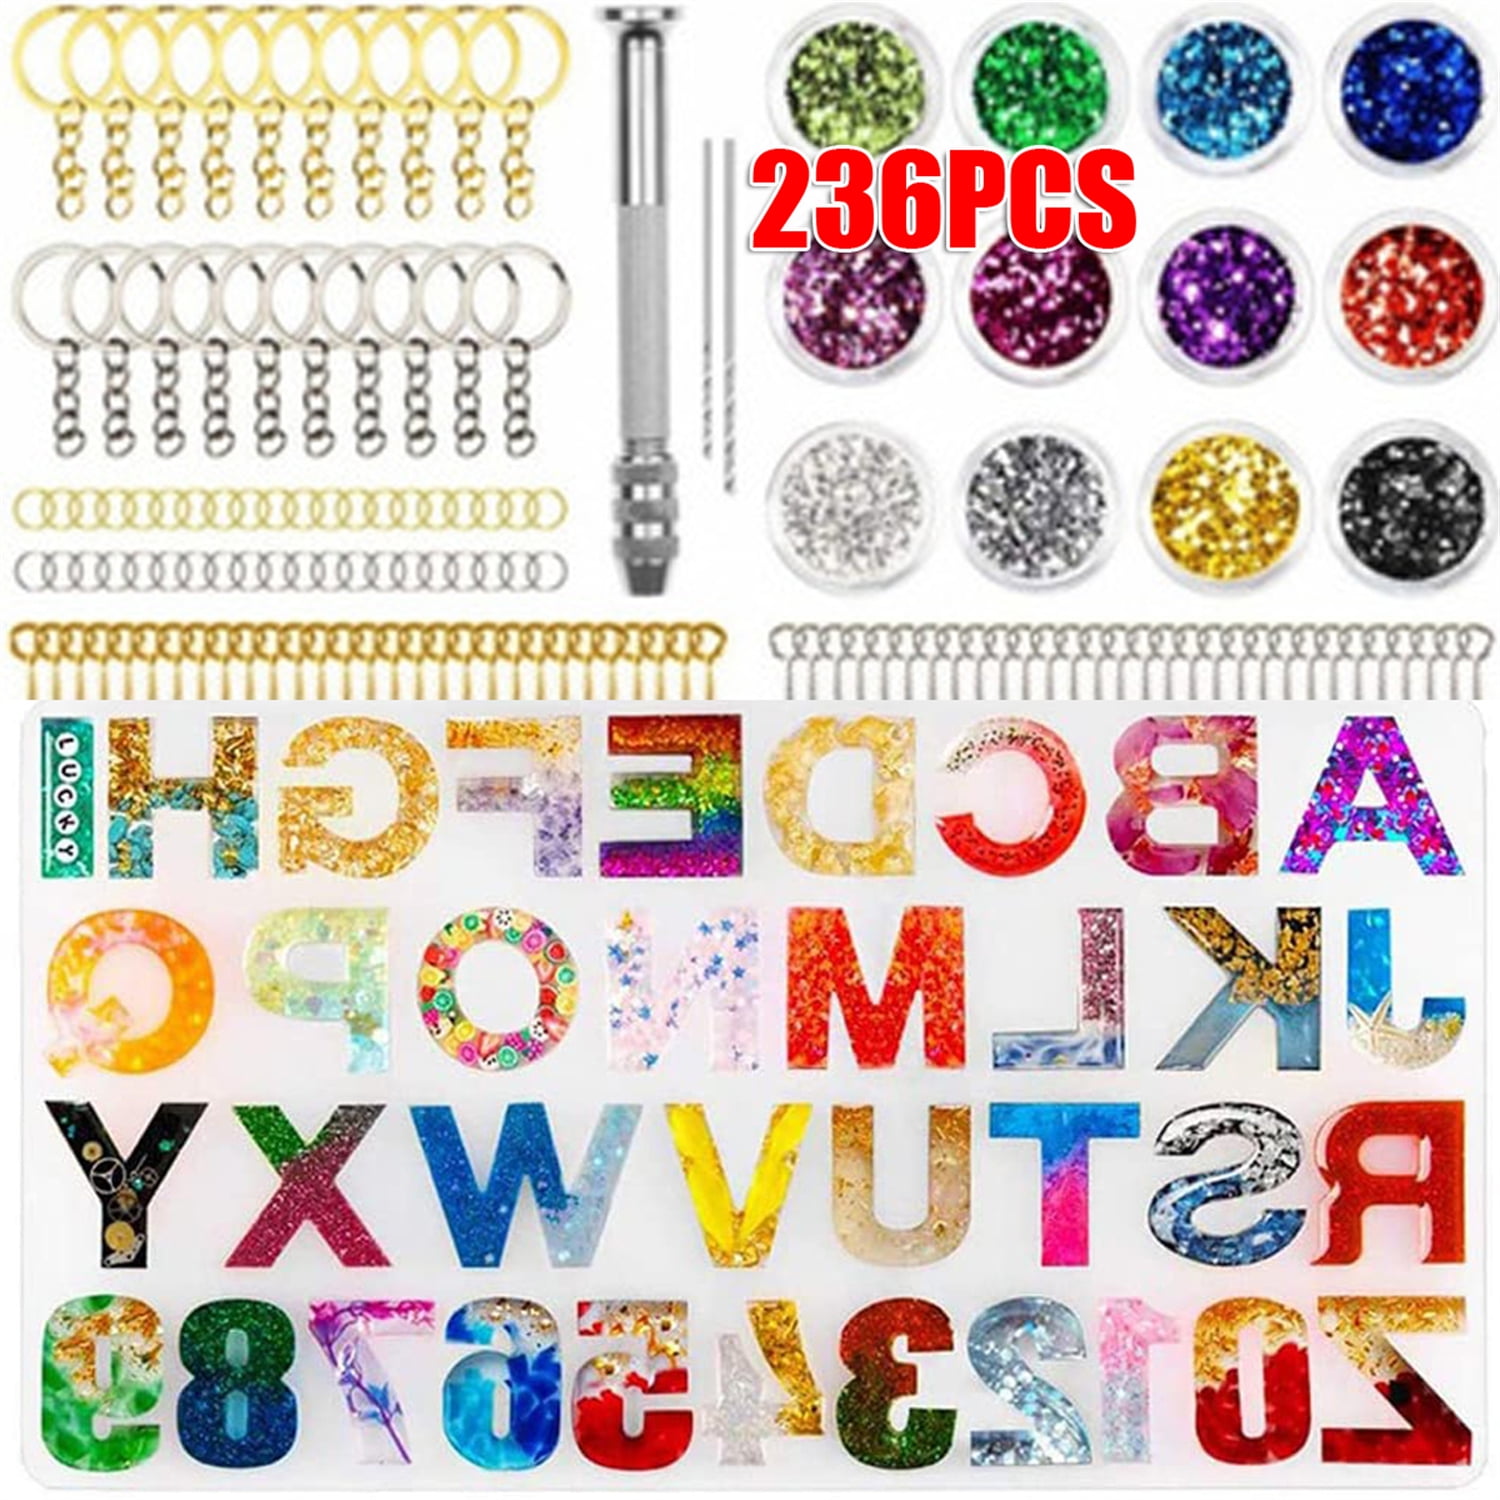 Alphabet Keychain Resin Mould Alphabets and Numbers by Oytra